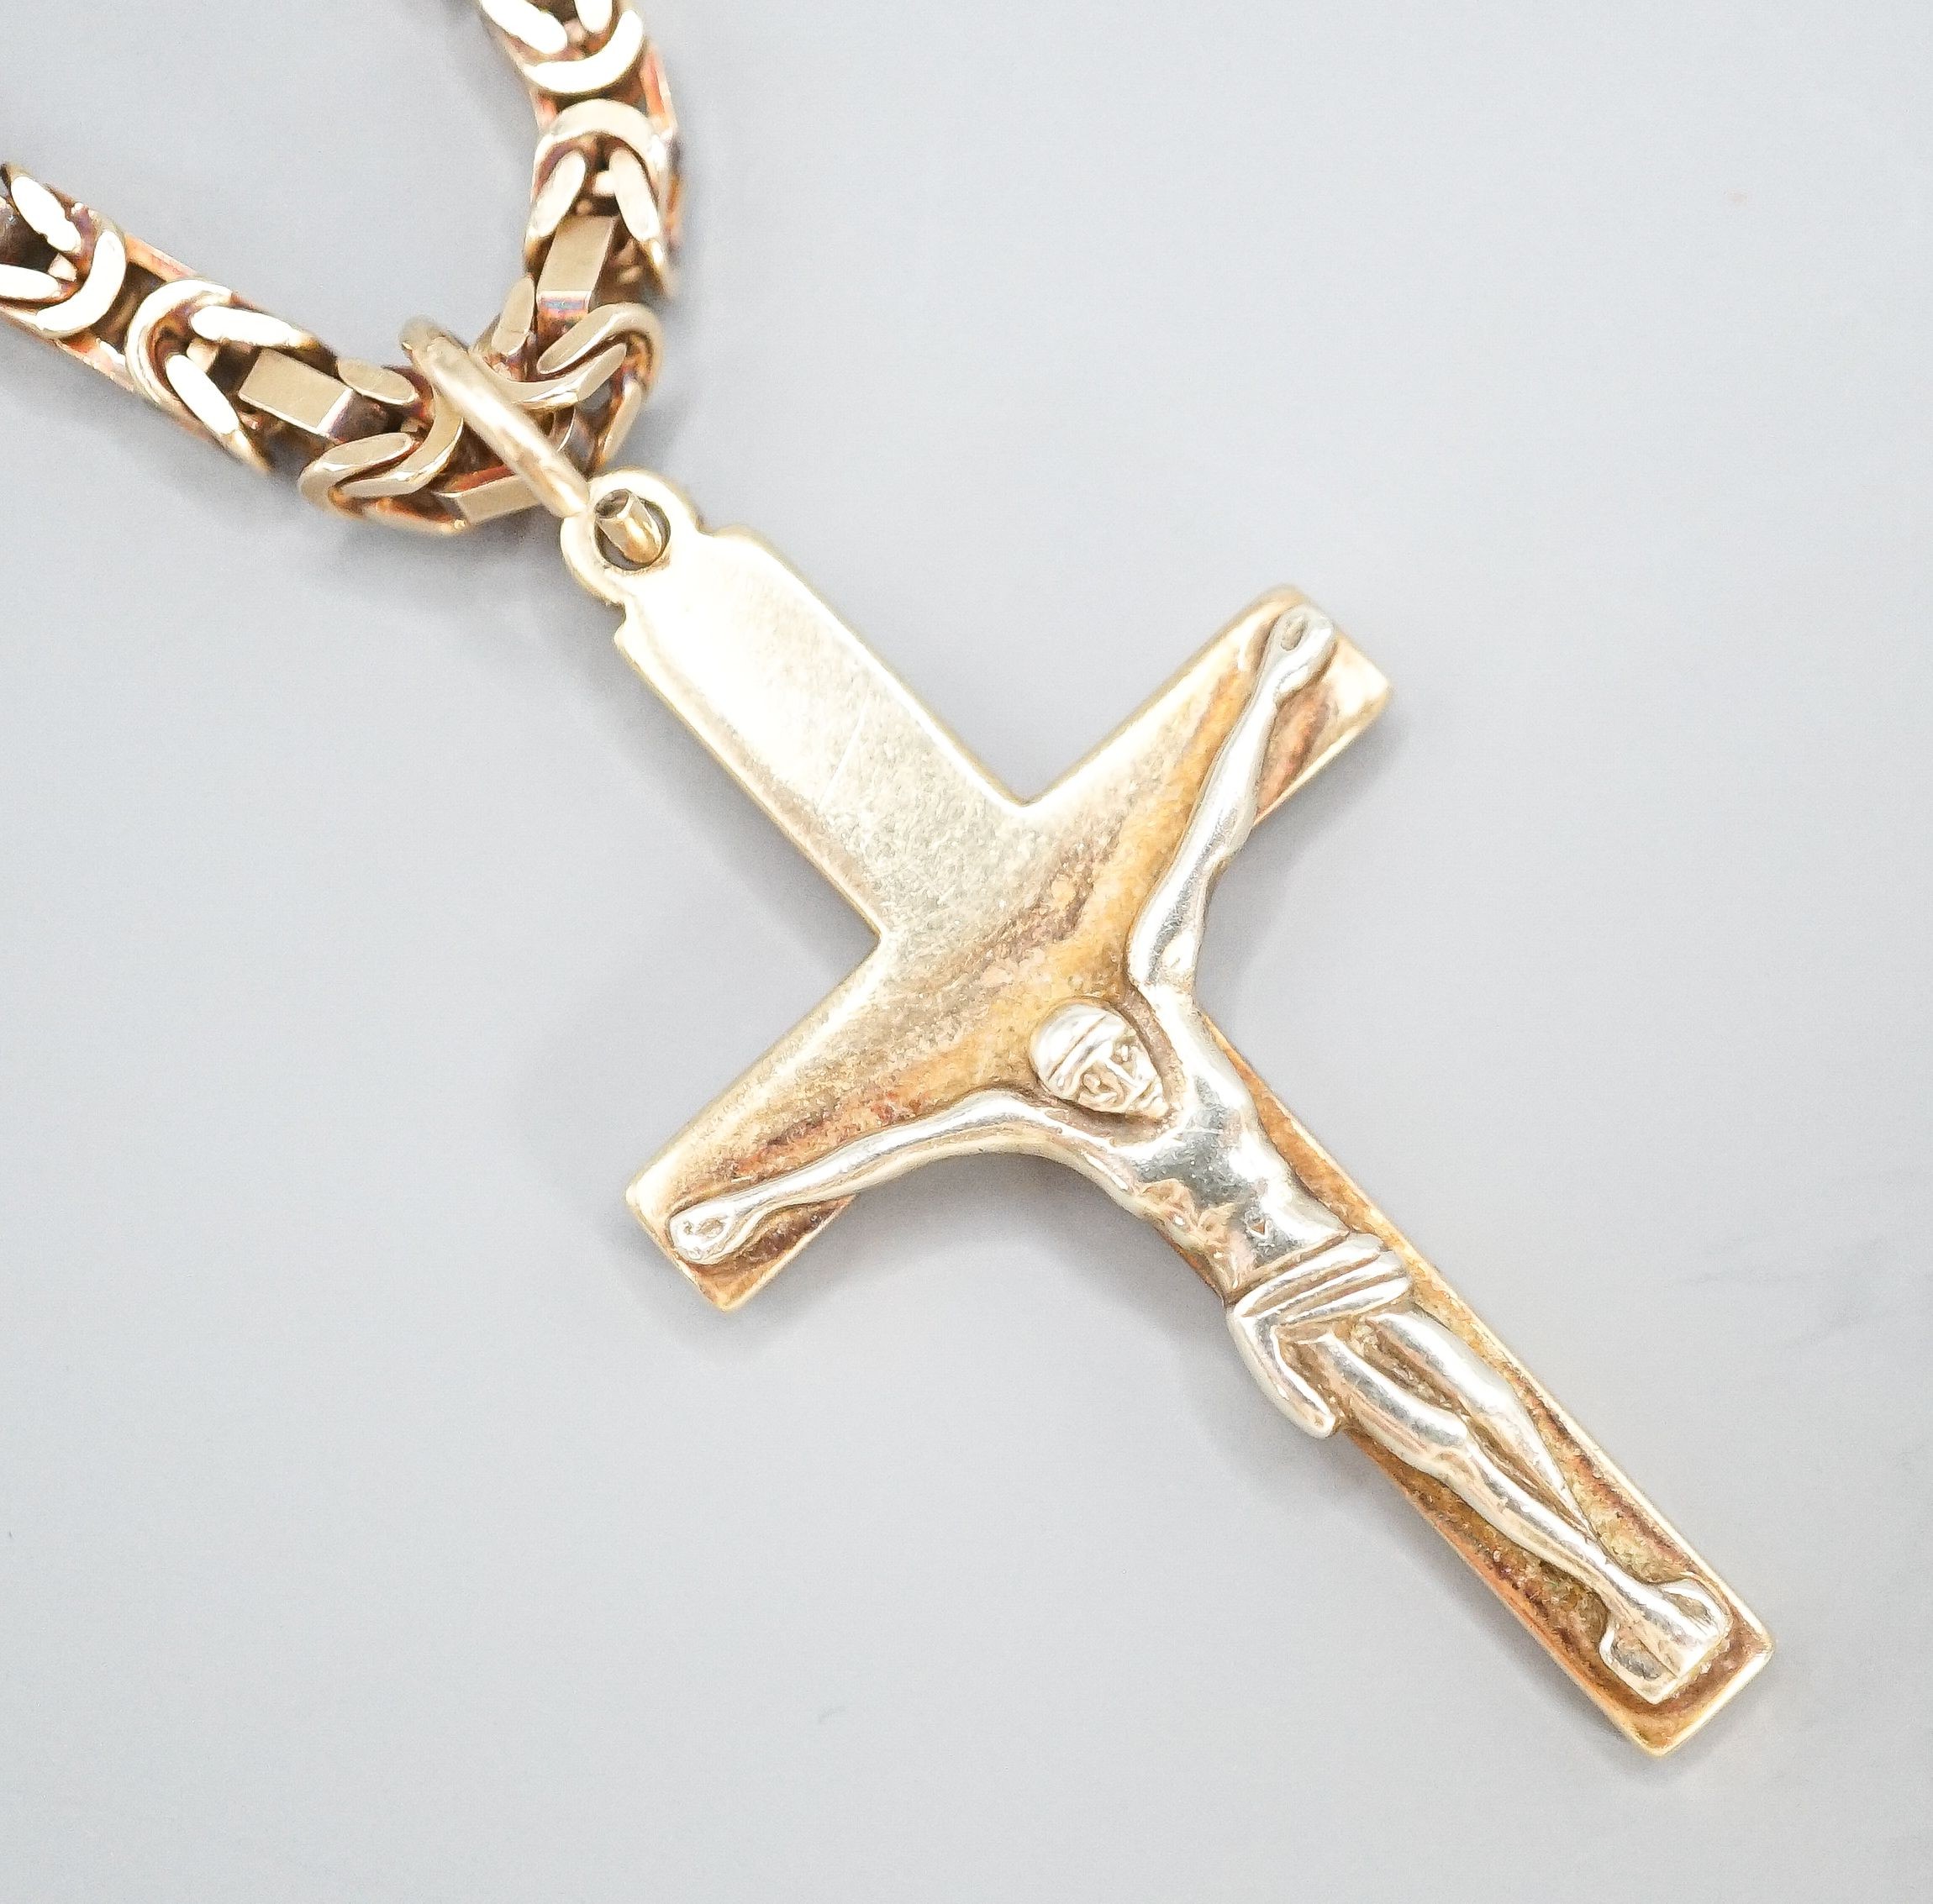 A 9ct gold crucifix pendant, 37mm, on a 9ct gold chain, 47cm